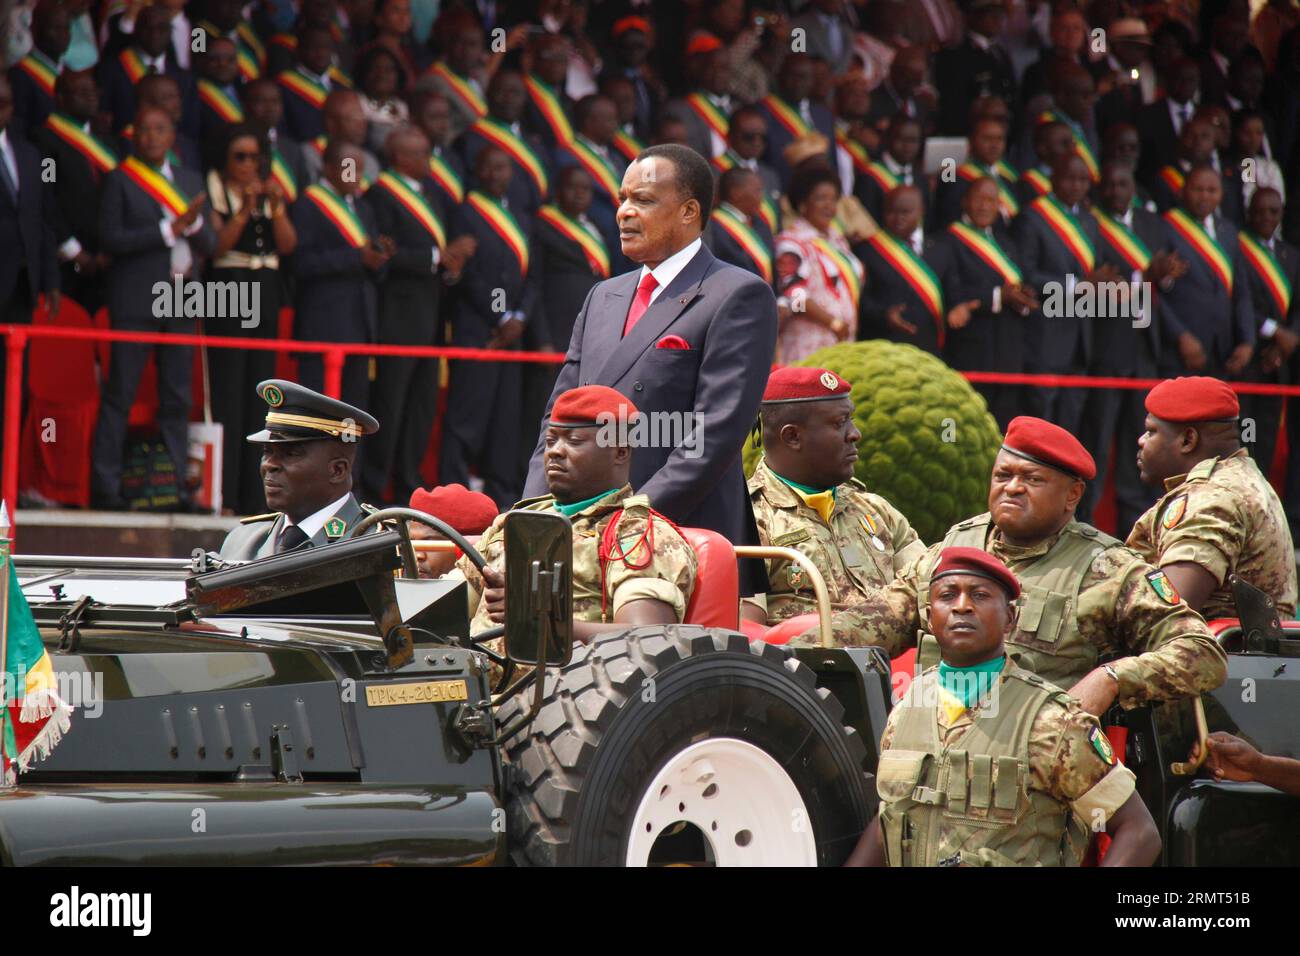 (140815) -- SIBITI (REPUBLIC OF CONGO), Aug. 15, 2014 -- Republic of Congo s President Denis Sassou-Nguesso reviews the army during a celebration marking the 54th independence anniversary of the country in Sibiti, the Republic of Congo, Aug. 15, 2014. ) CONGO-SIBITI-INDEPENDENCE-ANNIVERSARY LiuxKai PUBLICATIONxNOTxINxCHN   Republic of Congo Aug 15 2014 Republic of Congo S President Denis Sassou Nguesso Reviews The Army during a Celebration marking The 54th Independence Anniversary of The Country in  The Republic of Congo Aug 15 2014 Congo  Independence Anniversary  PUBLICATIONxNOTxINxCHN Stock Photo